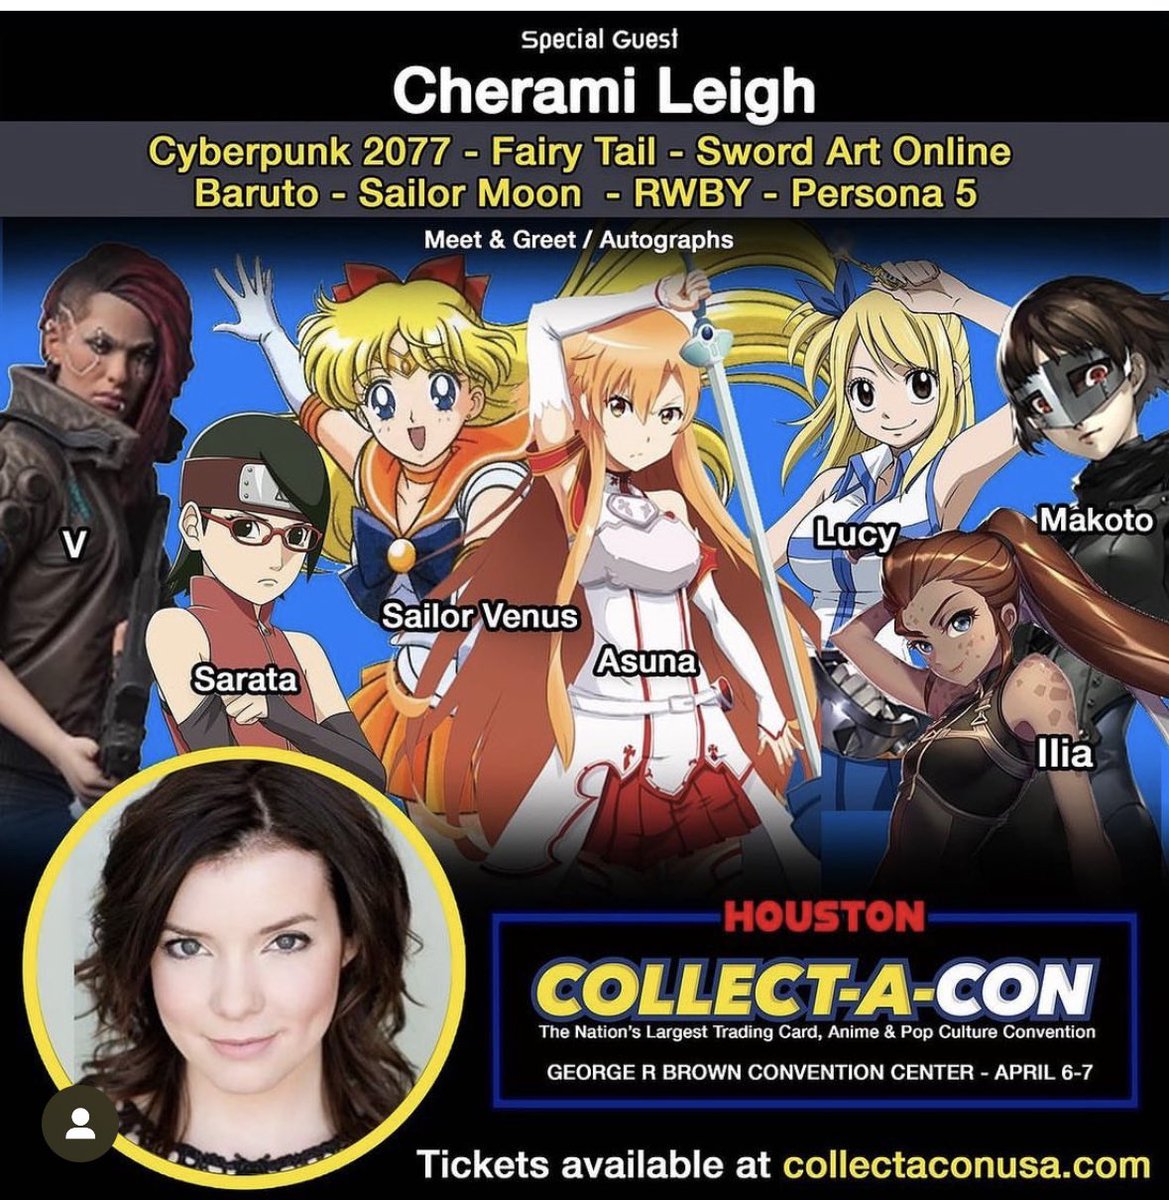 Next weekend I’ll be continuing my convention travels in Texas at #collectacon in Houston!